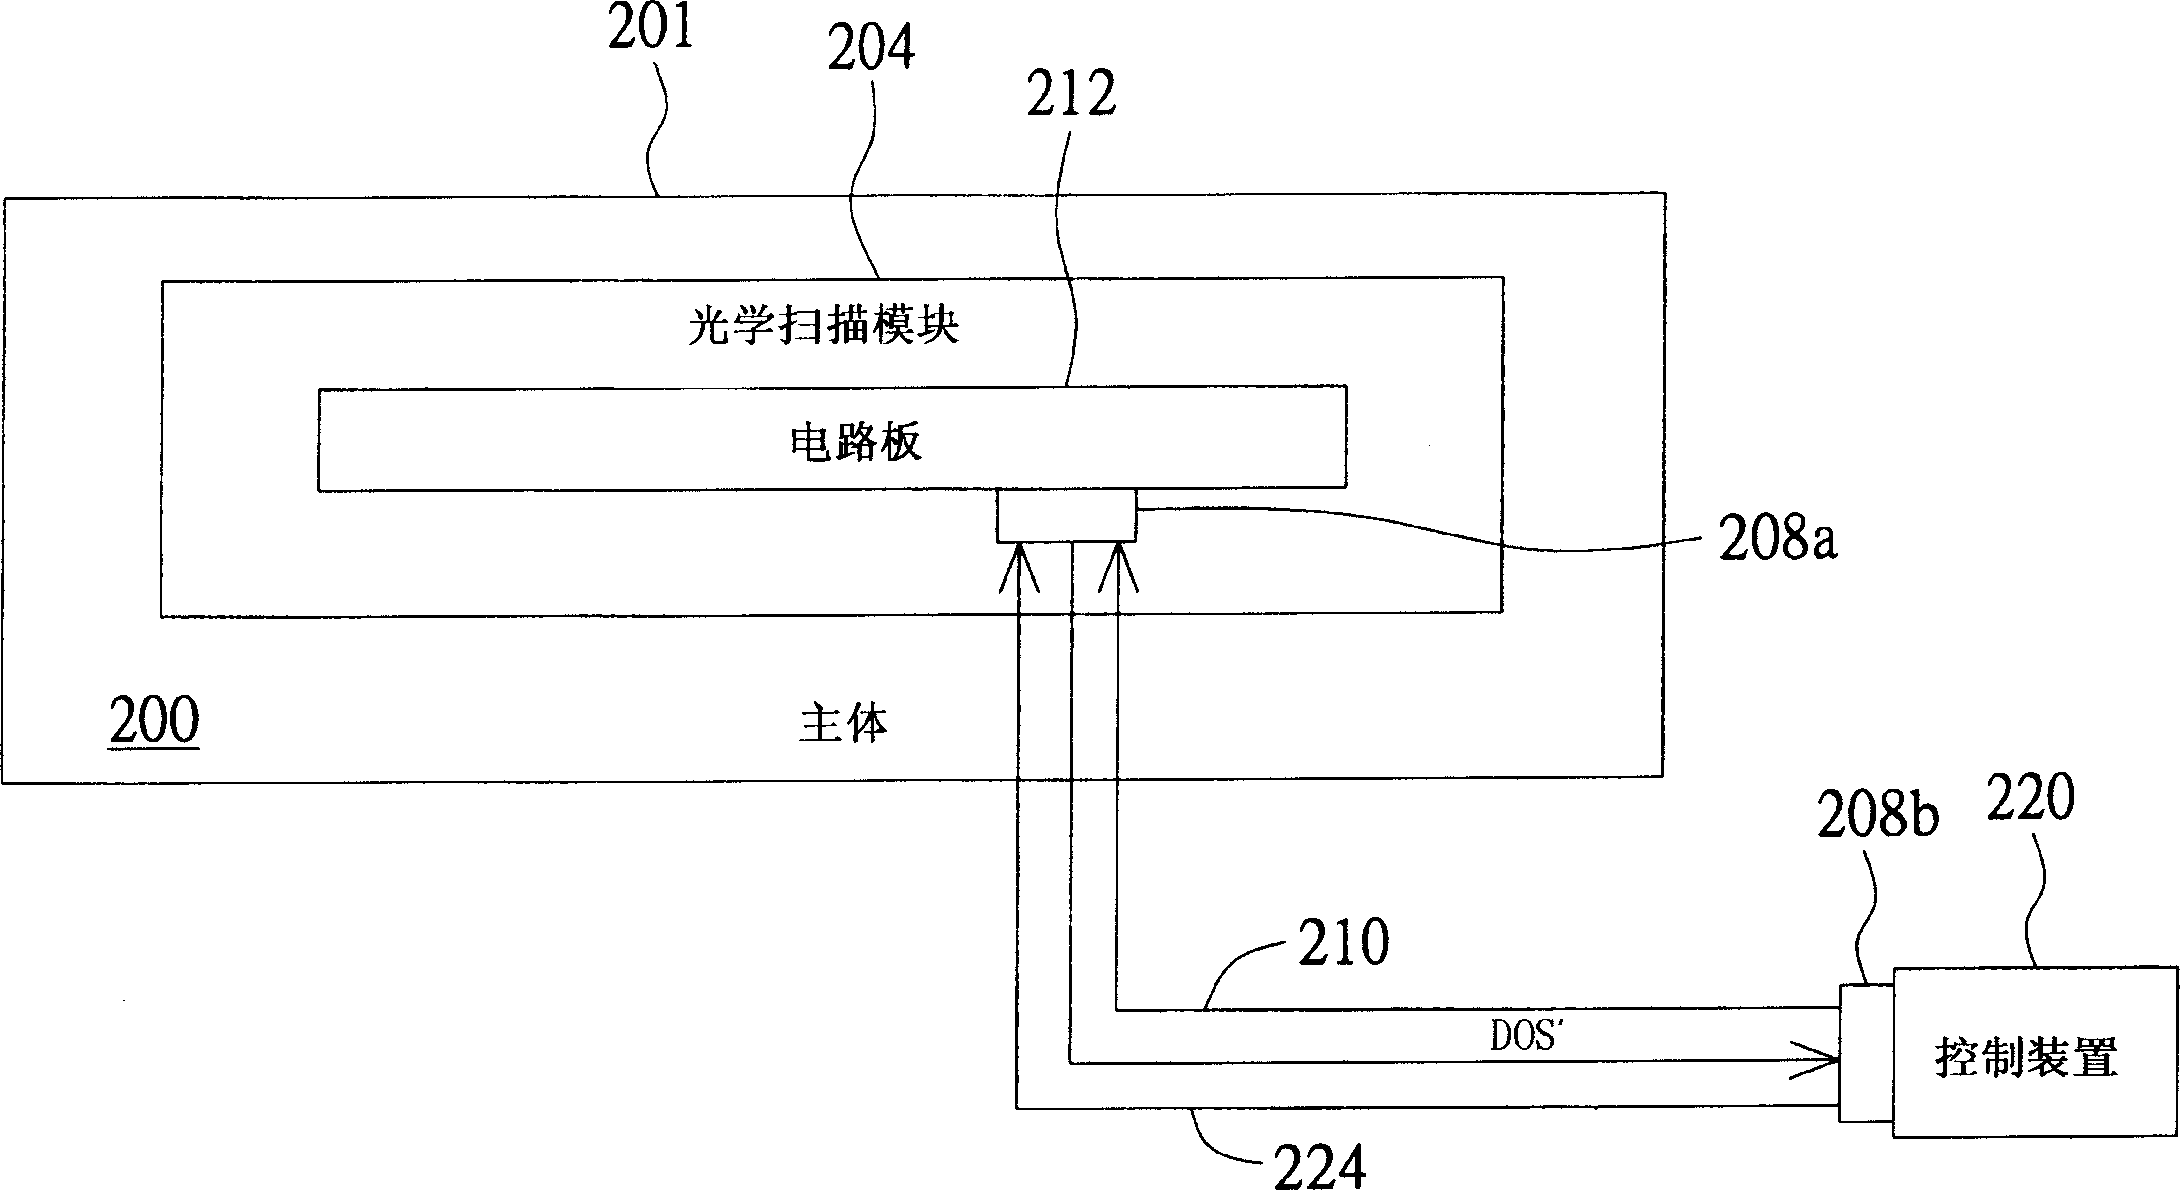 Optic scan module structure of scanning device